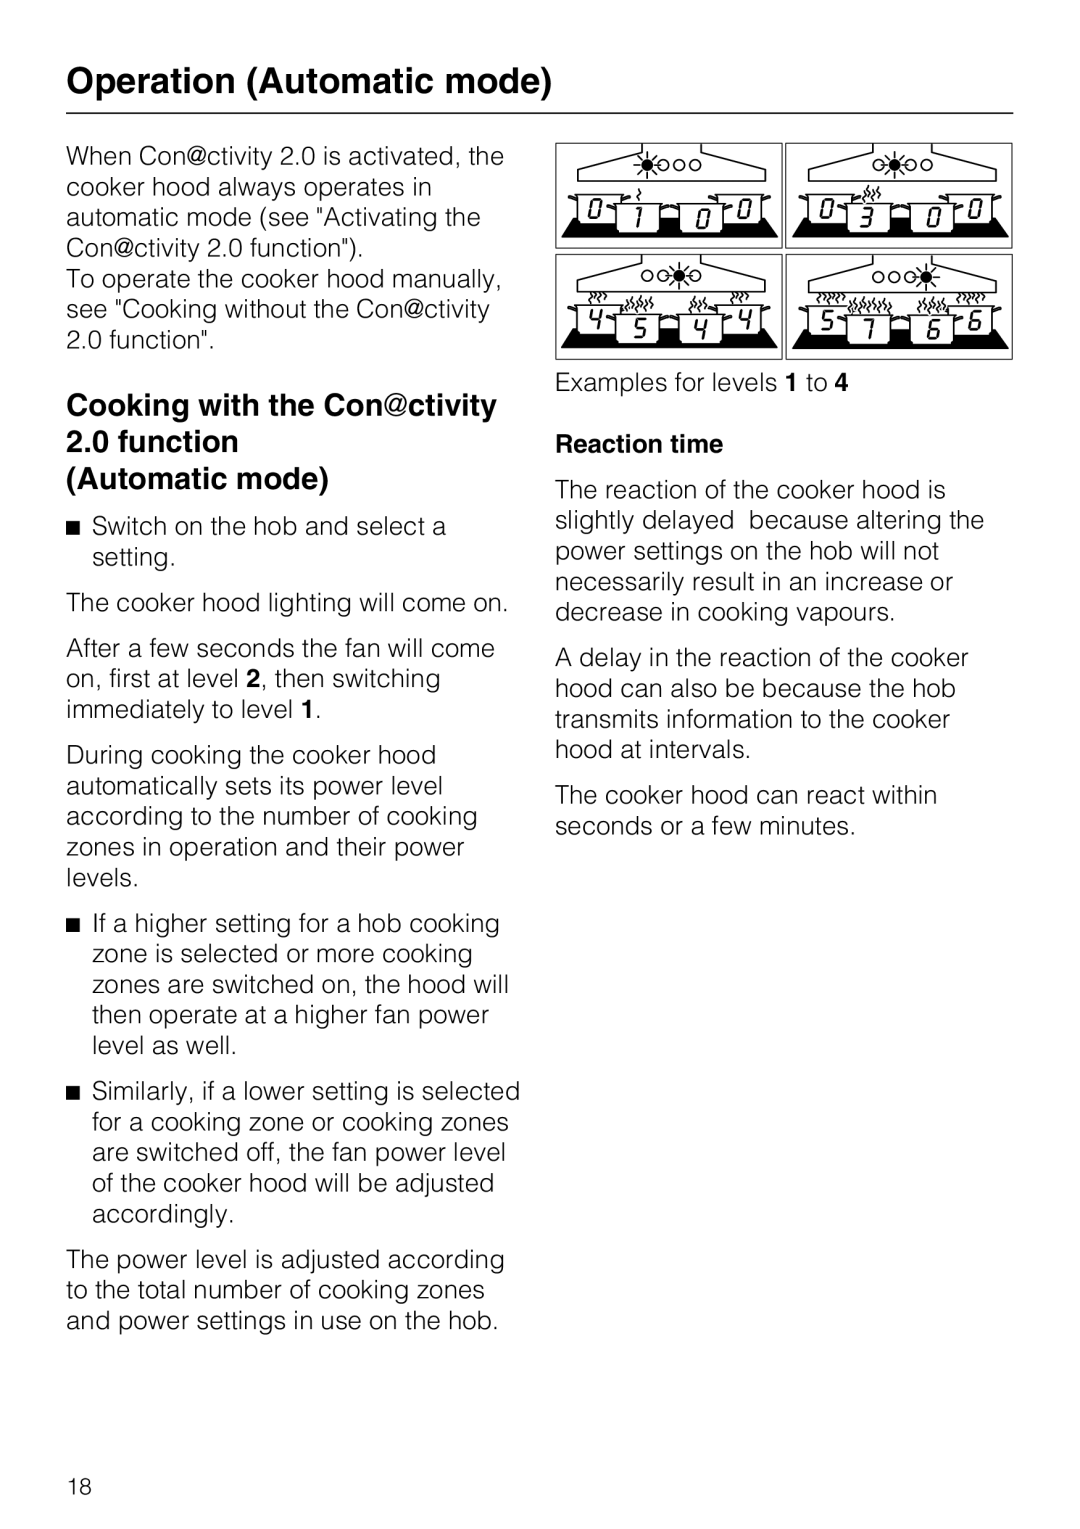 Miele 09 730 840 Operation Automatic mode, Cooking with the Conctivity, 2.0function Automatic mode, Reaction time 